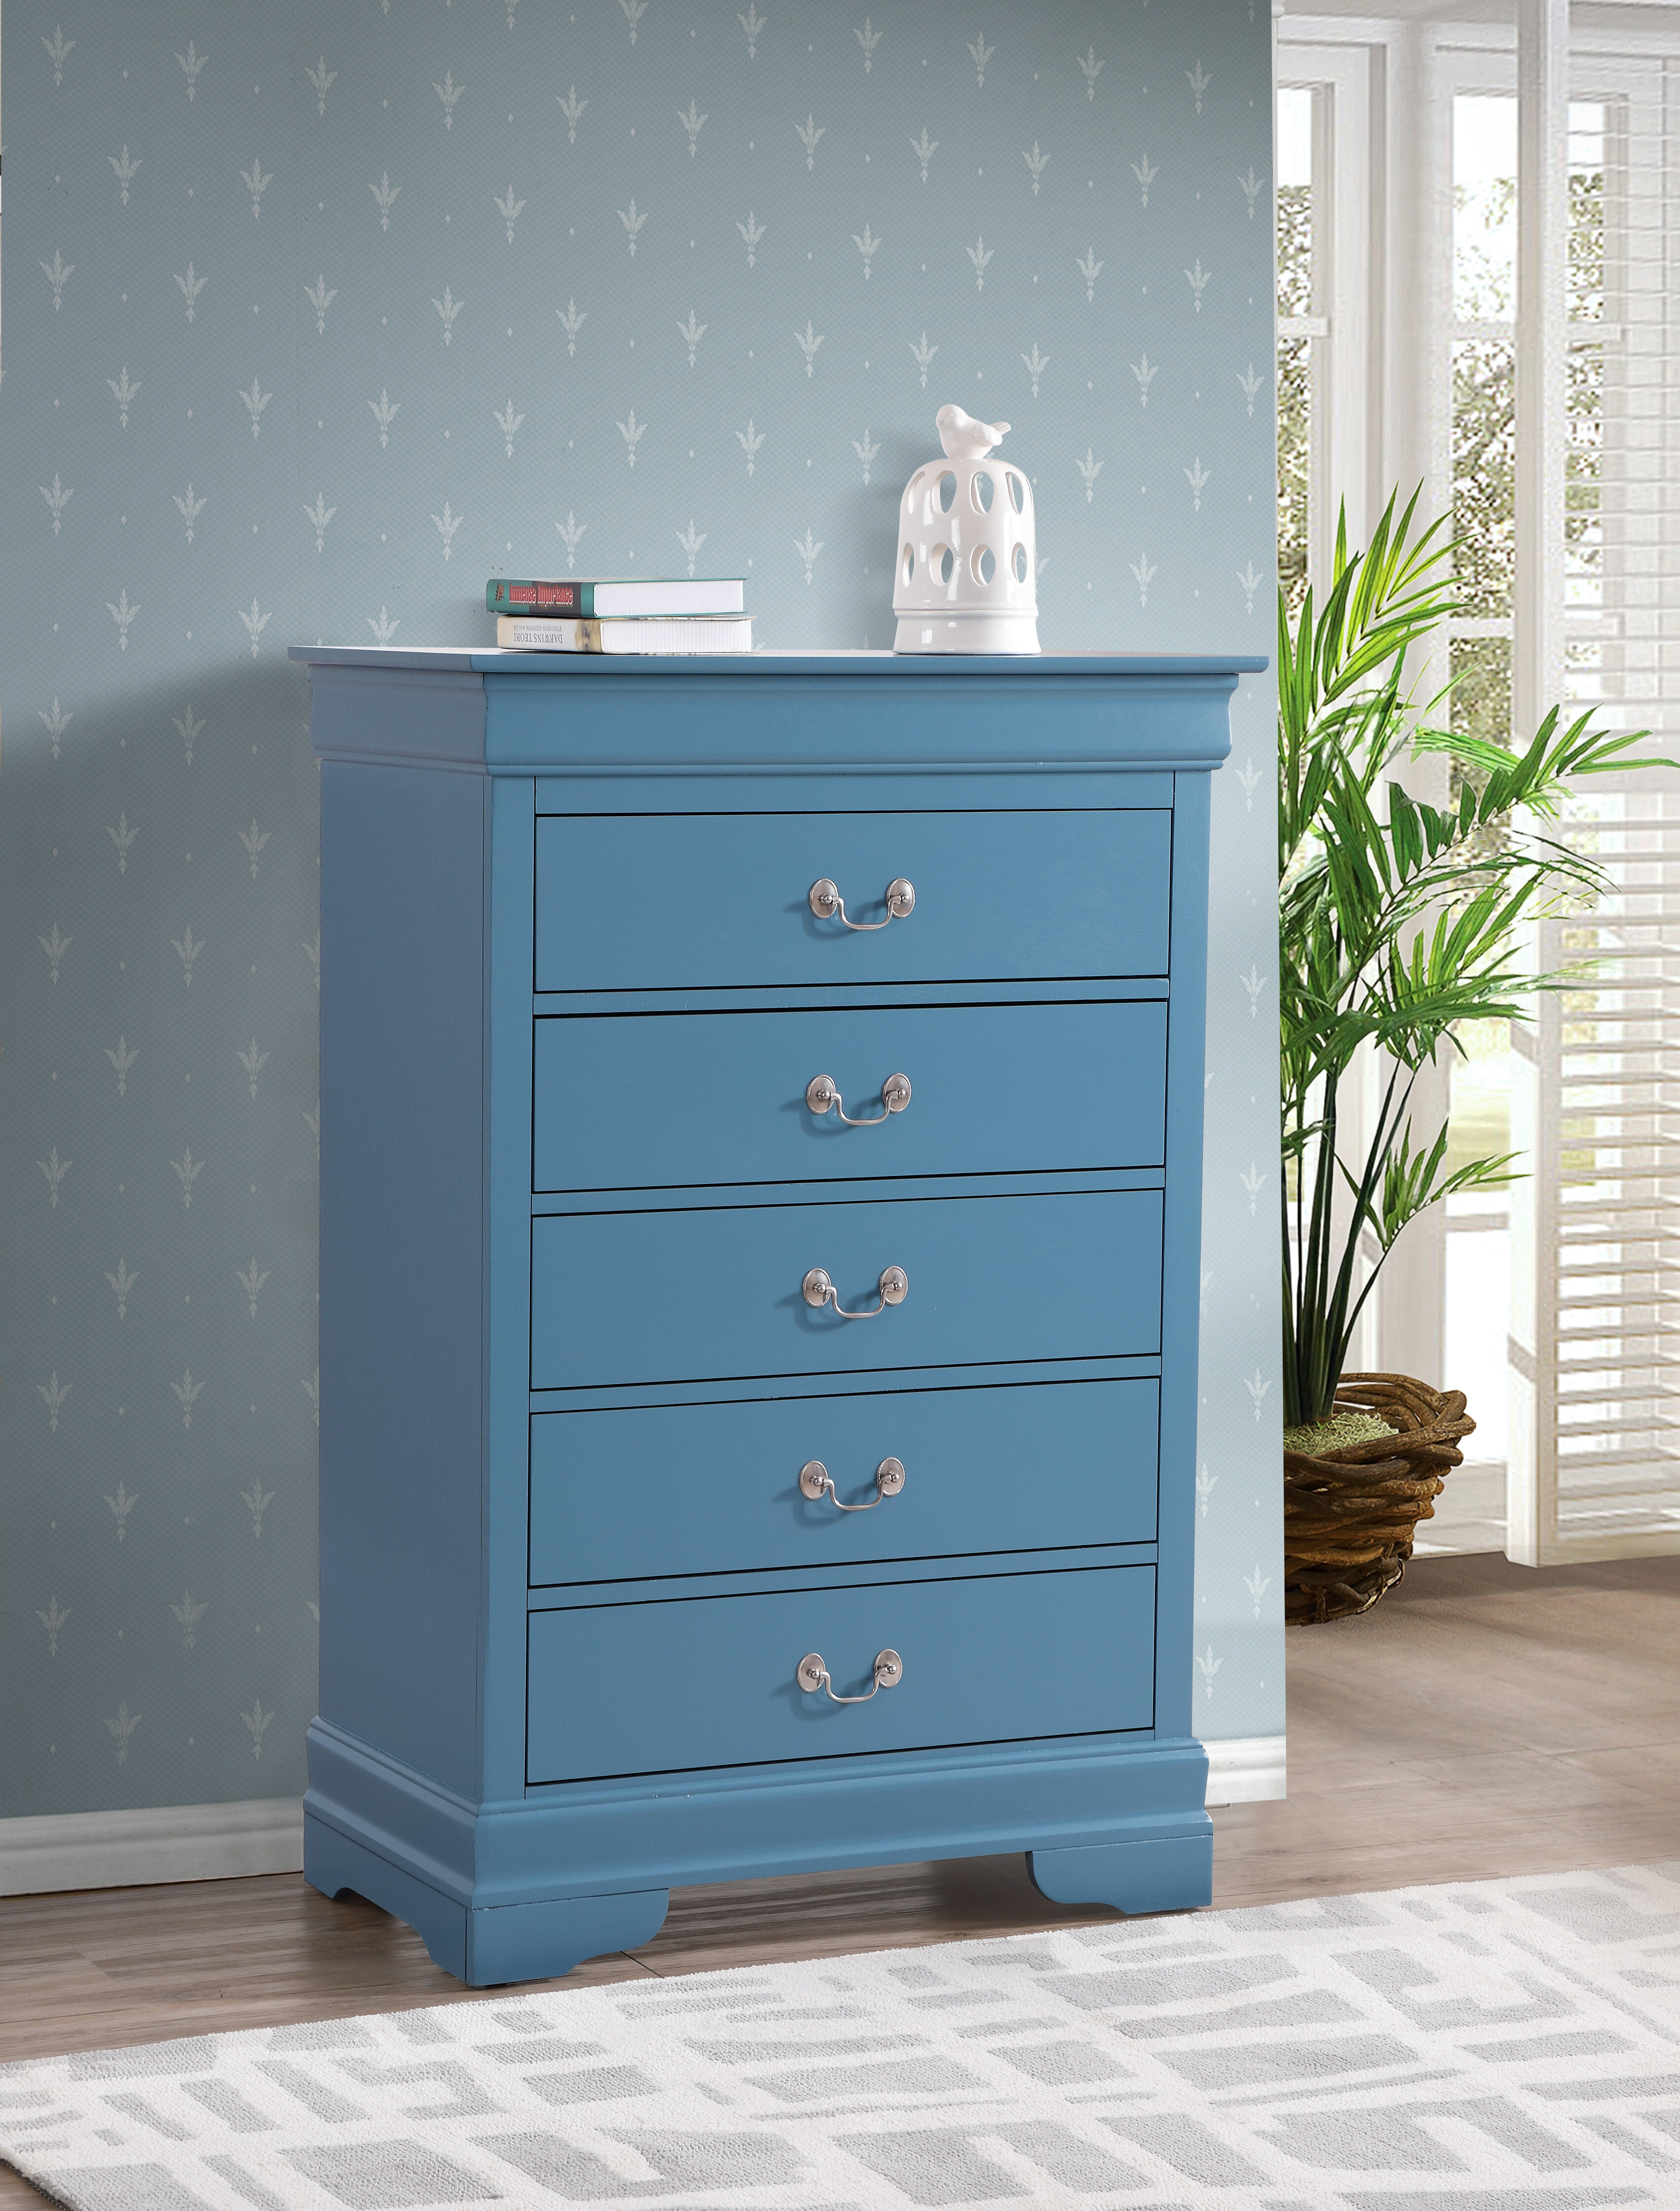 Blue Dressers Up To 80 Off This Week Only Wayfair